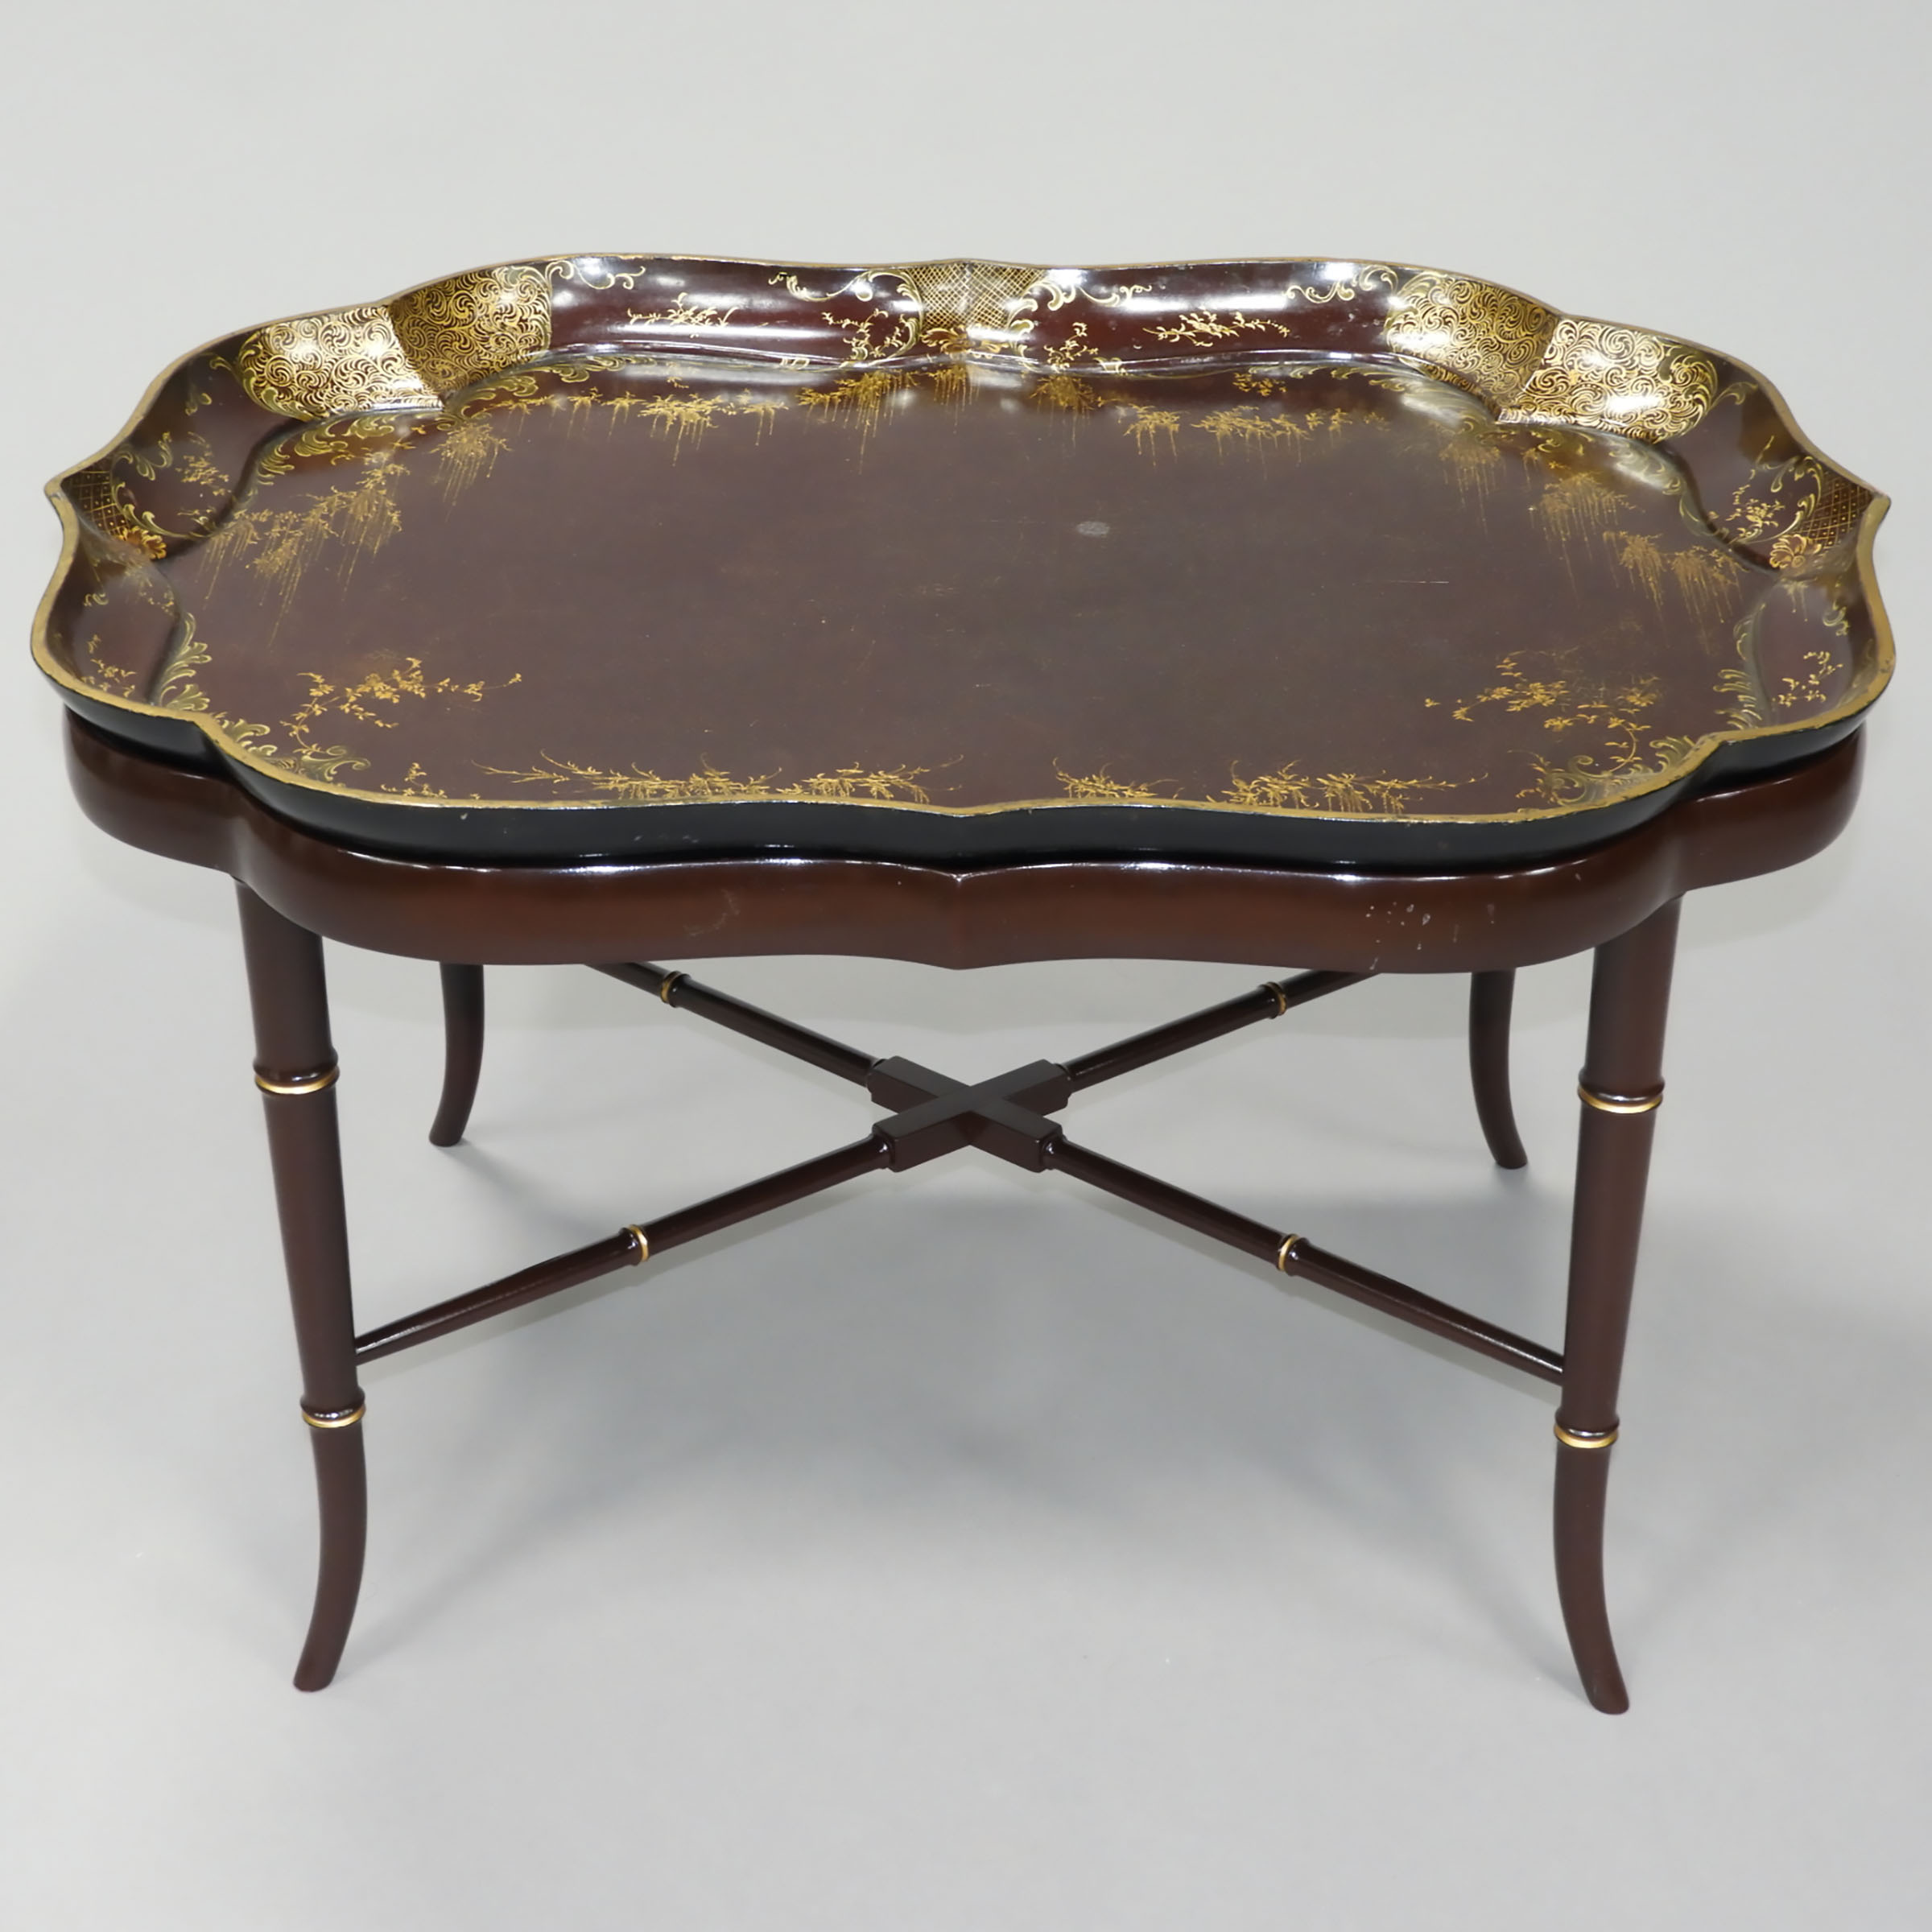 Victorian Oxblood Lacquered Papier Maché Tea Tray on Stand, mid 19th century and Later